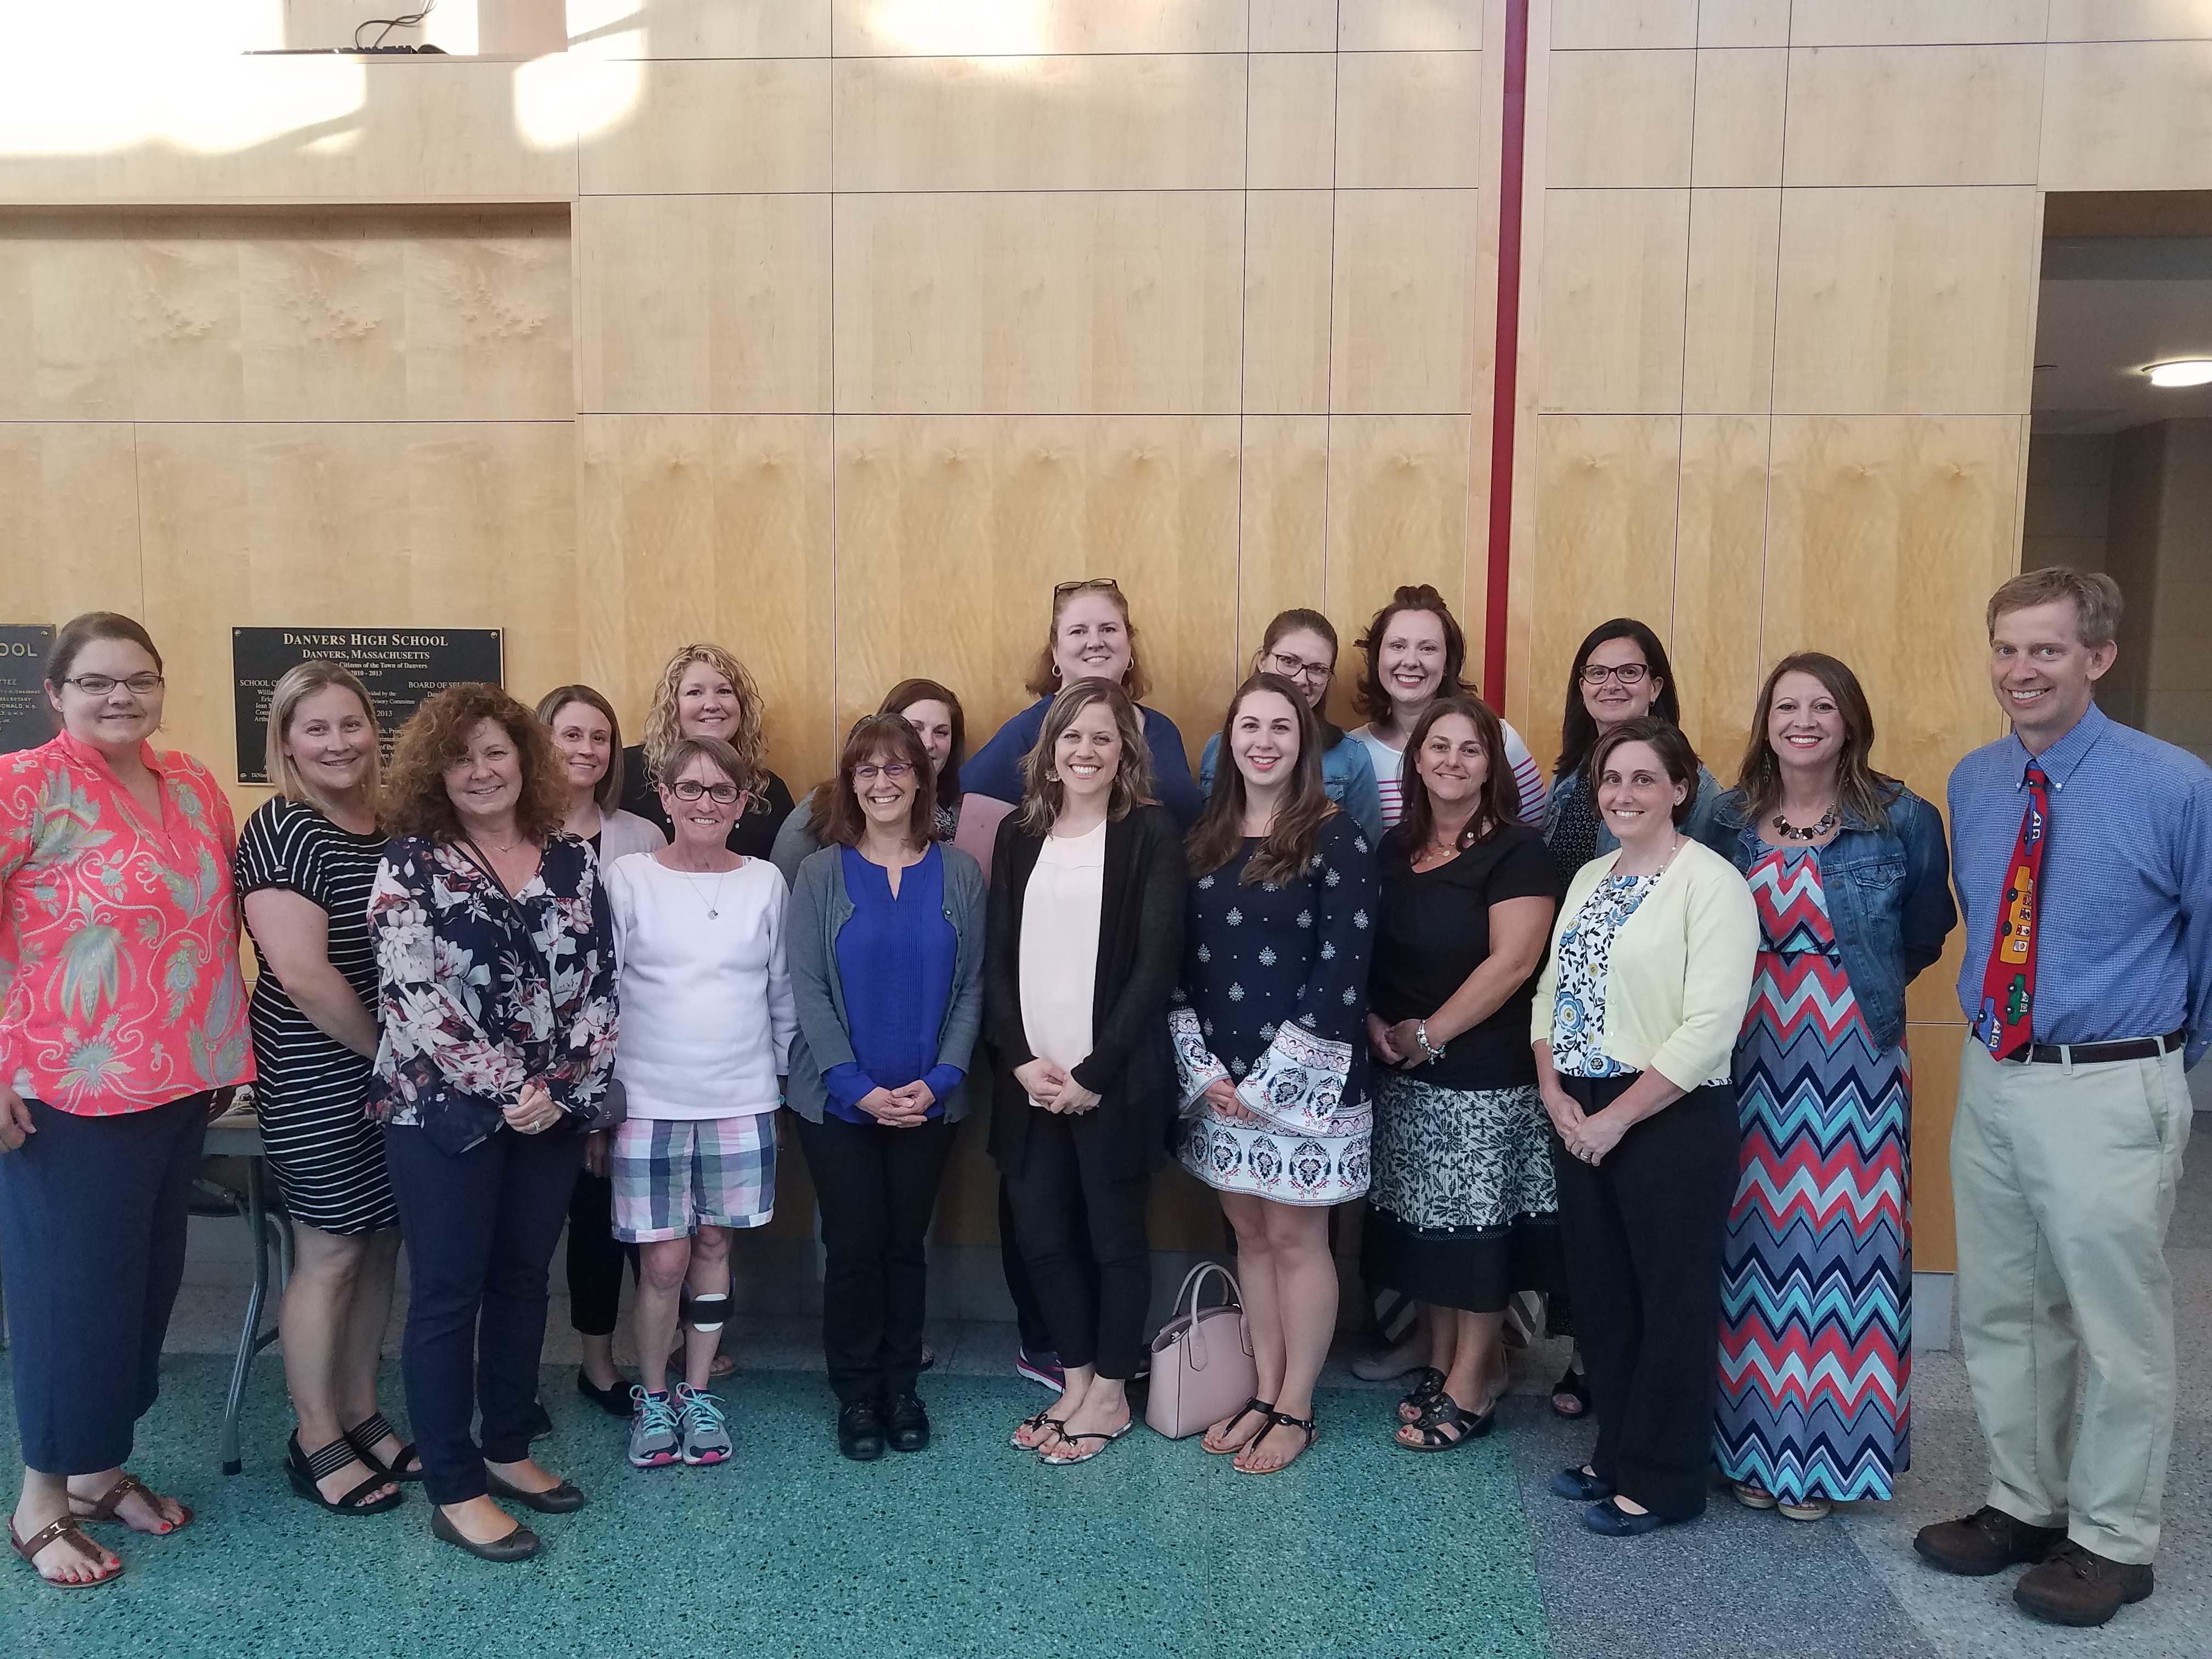 Congratulations to This Year’s DEEP Teacher Grant recipients!